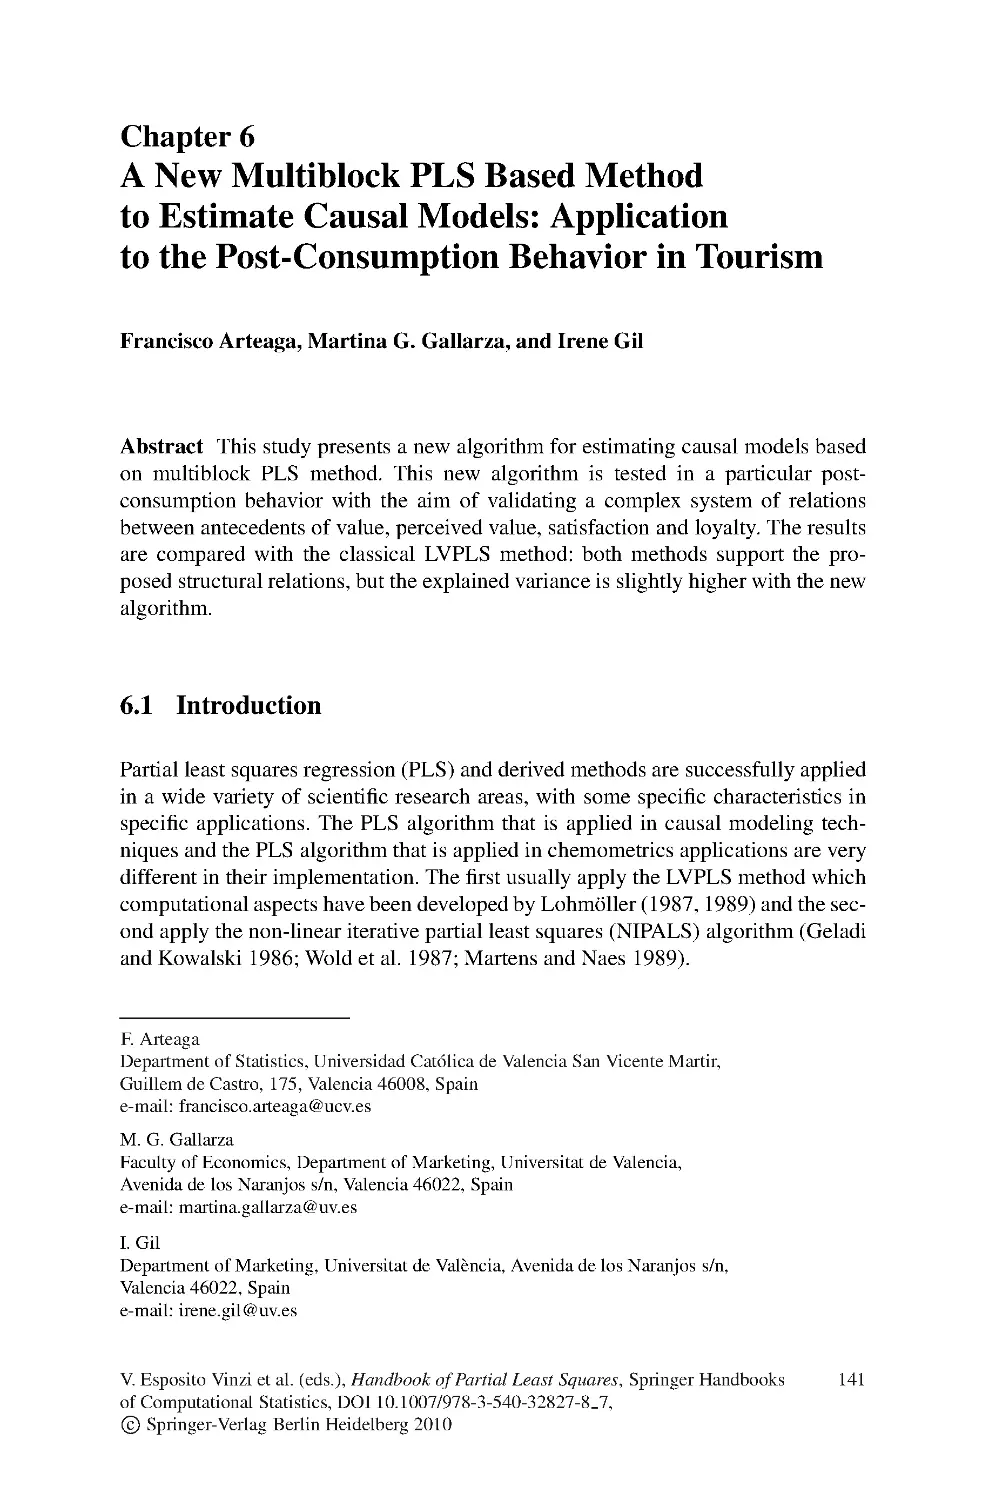 6 A New Multiblock PLS Based Method to Estimate Causal Models: Application to the Post-Consumption Behavior in Tourism